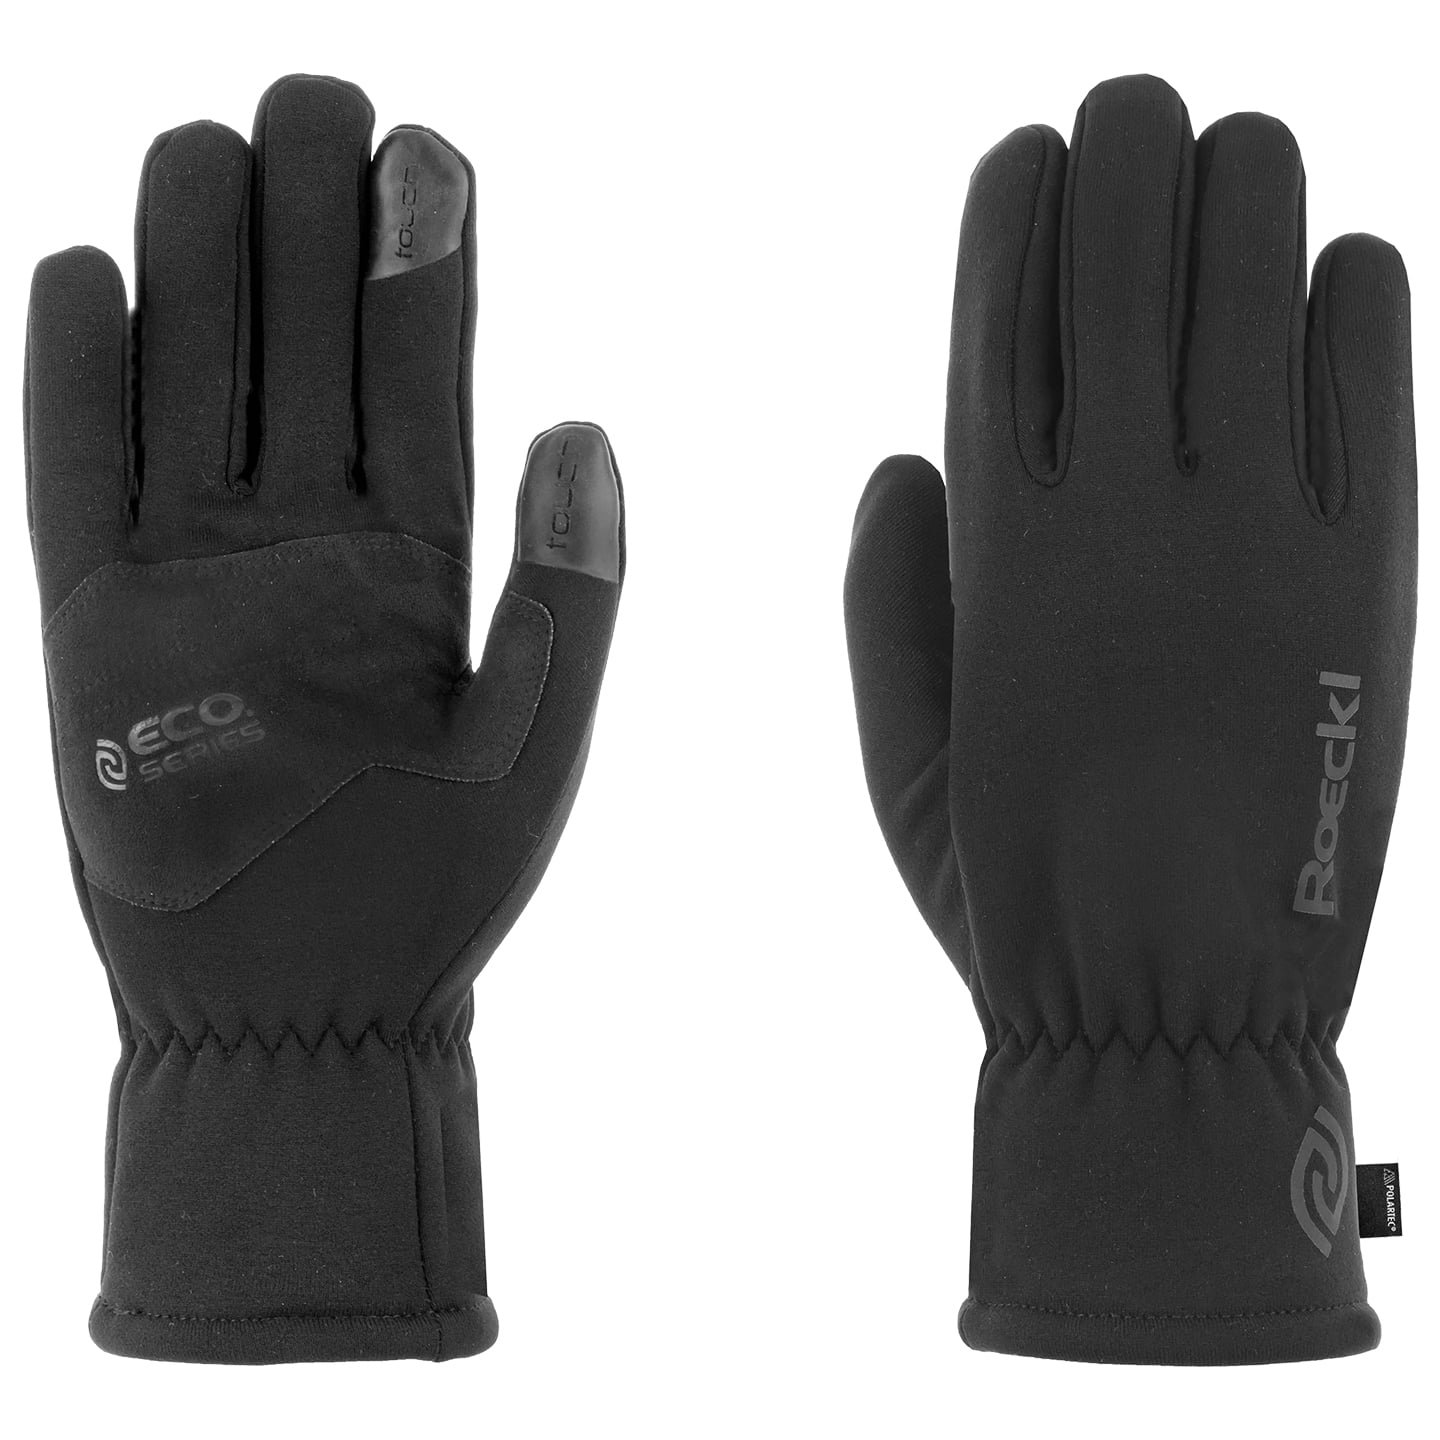 ROECKL Parlan Winter Gloves Winter Cycling Gloves, for men, size 10,5, Bike gloves, Bike clothing